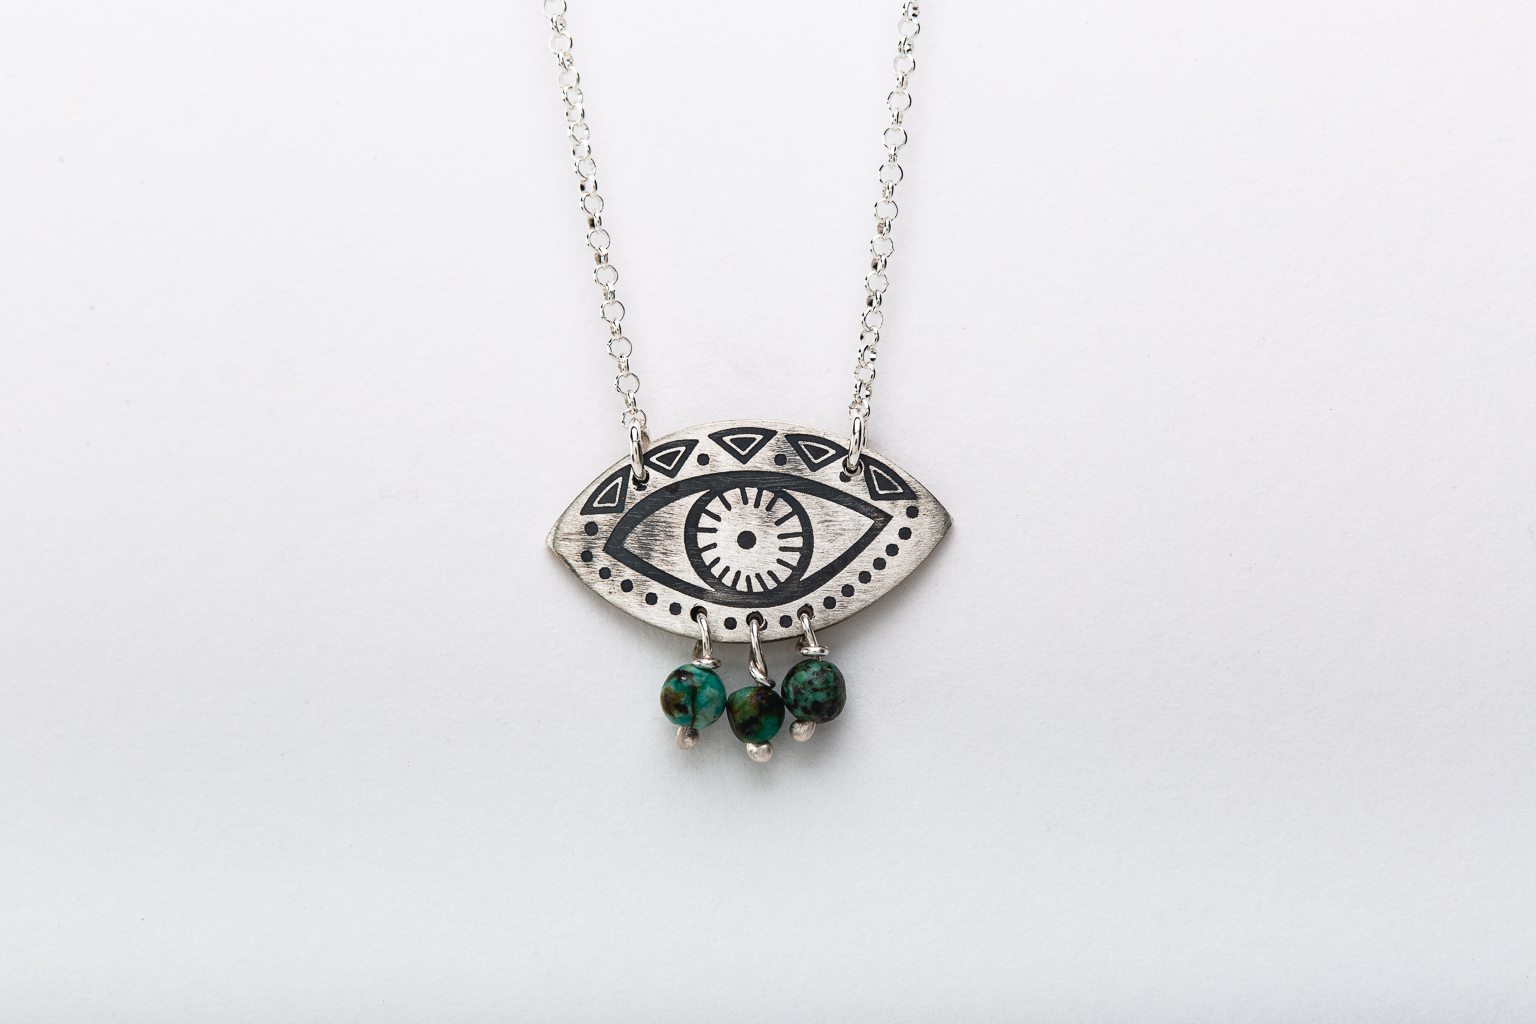 Evil-eye necklace with peridot beads